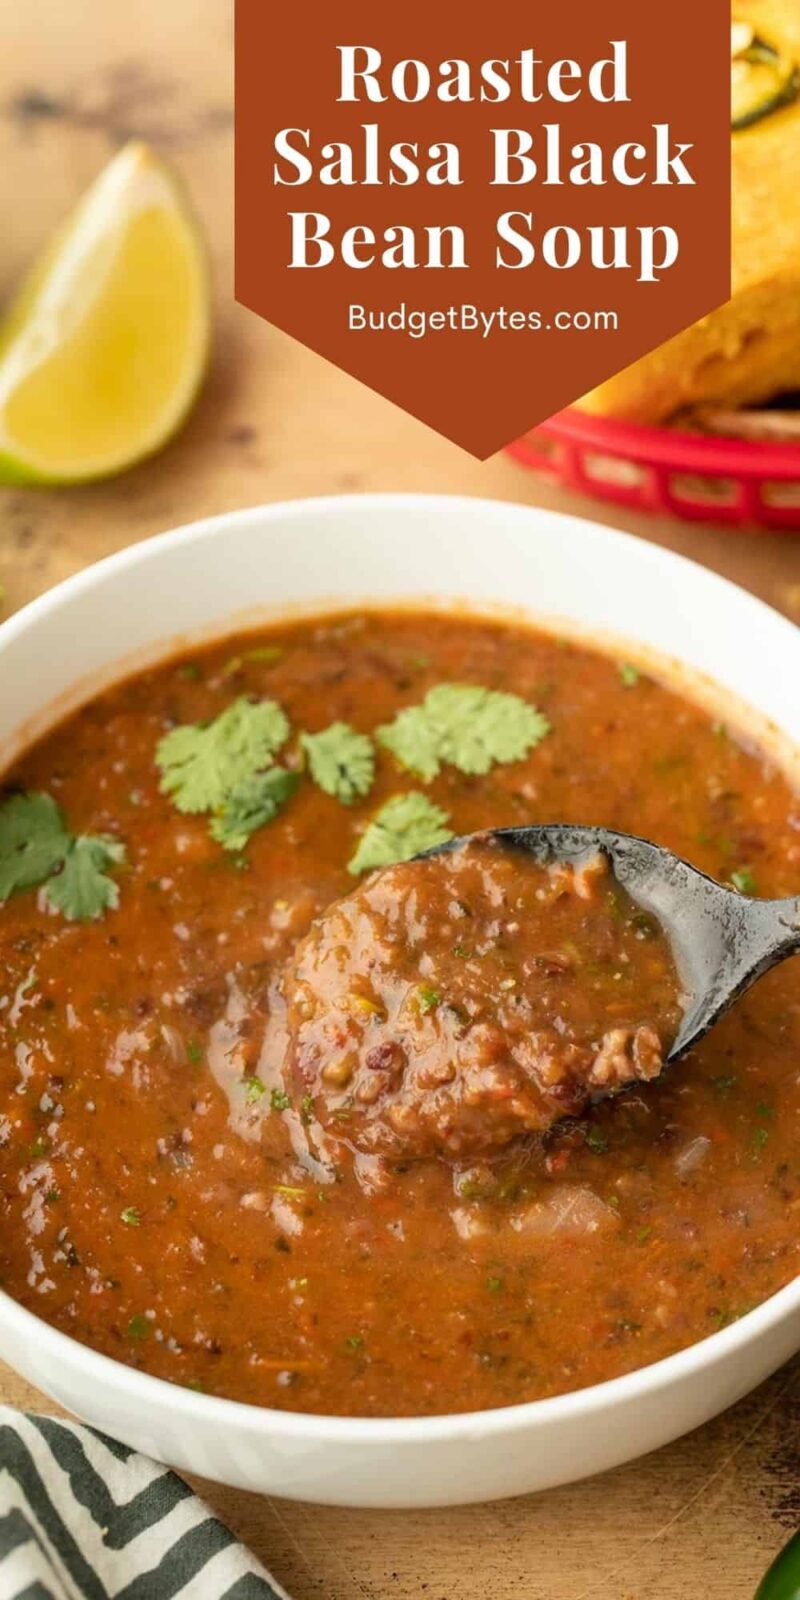 Close up of a bowl of roasted salsa and black bean soup, title text at the top